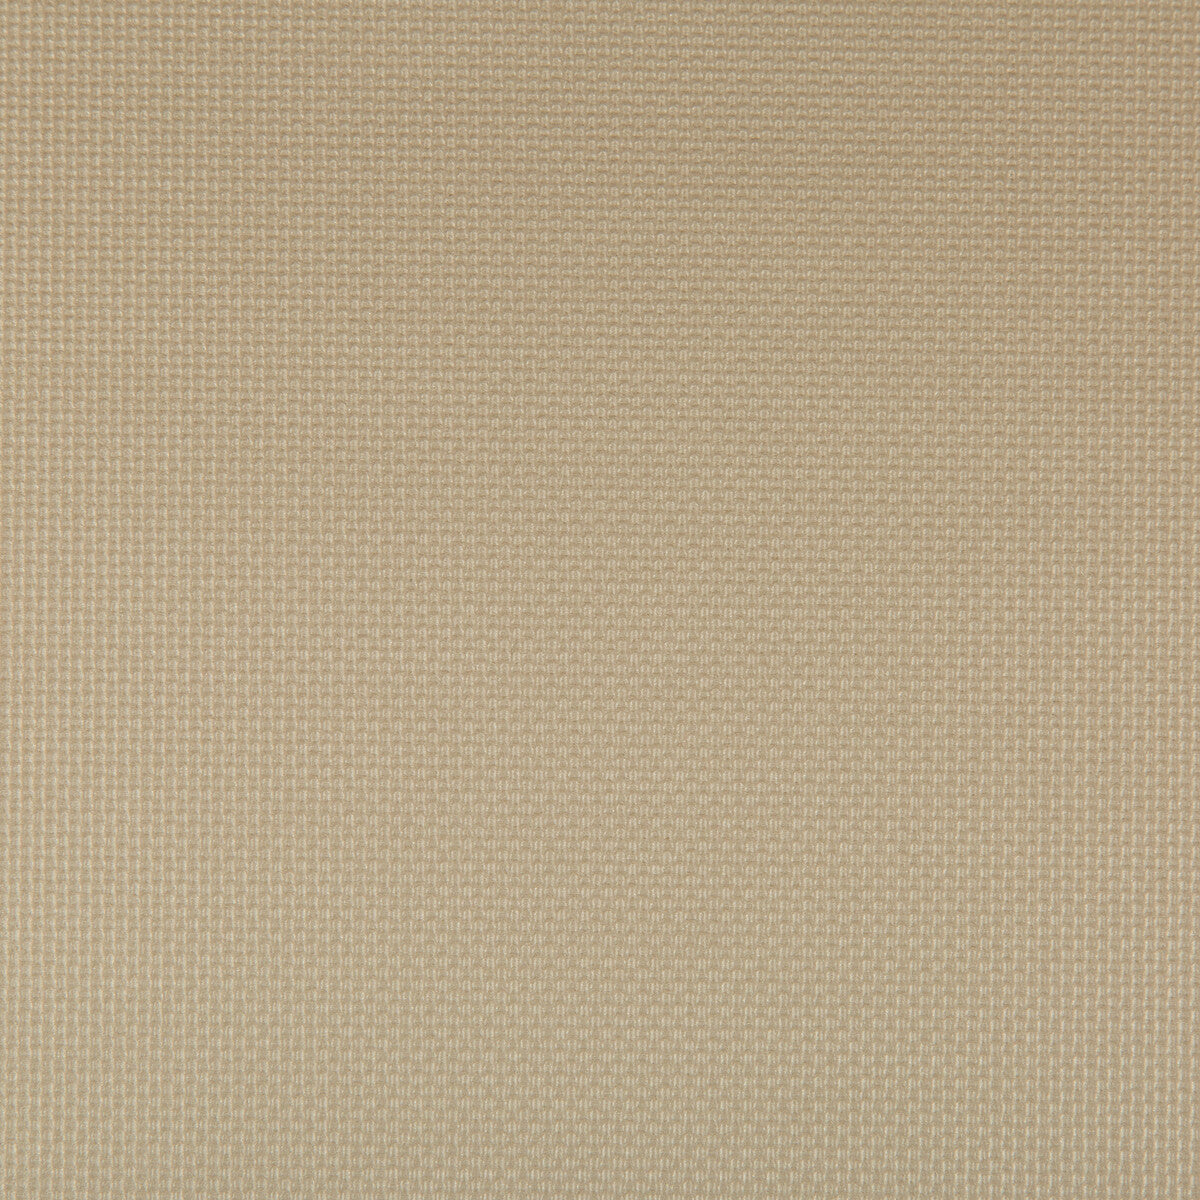 Sidney fabric in bronze color - pattern SIDNEY.106.0 - by Kravet Contract